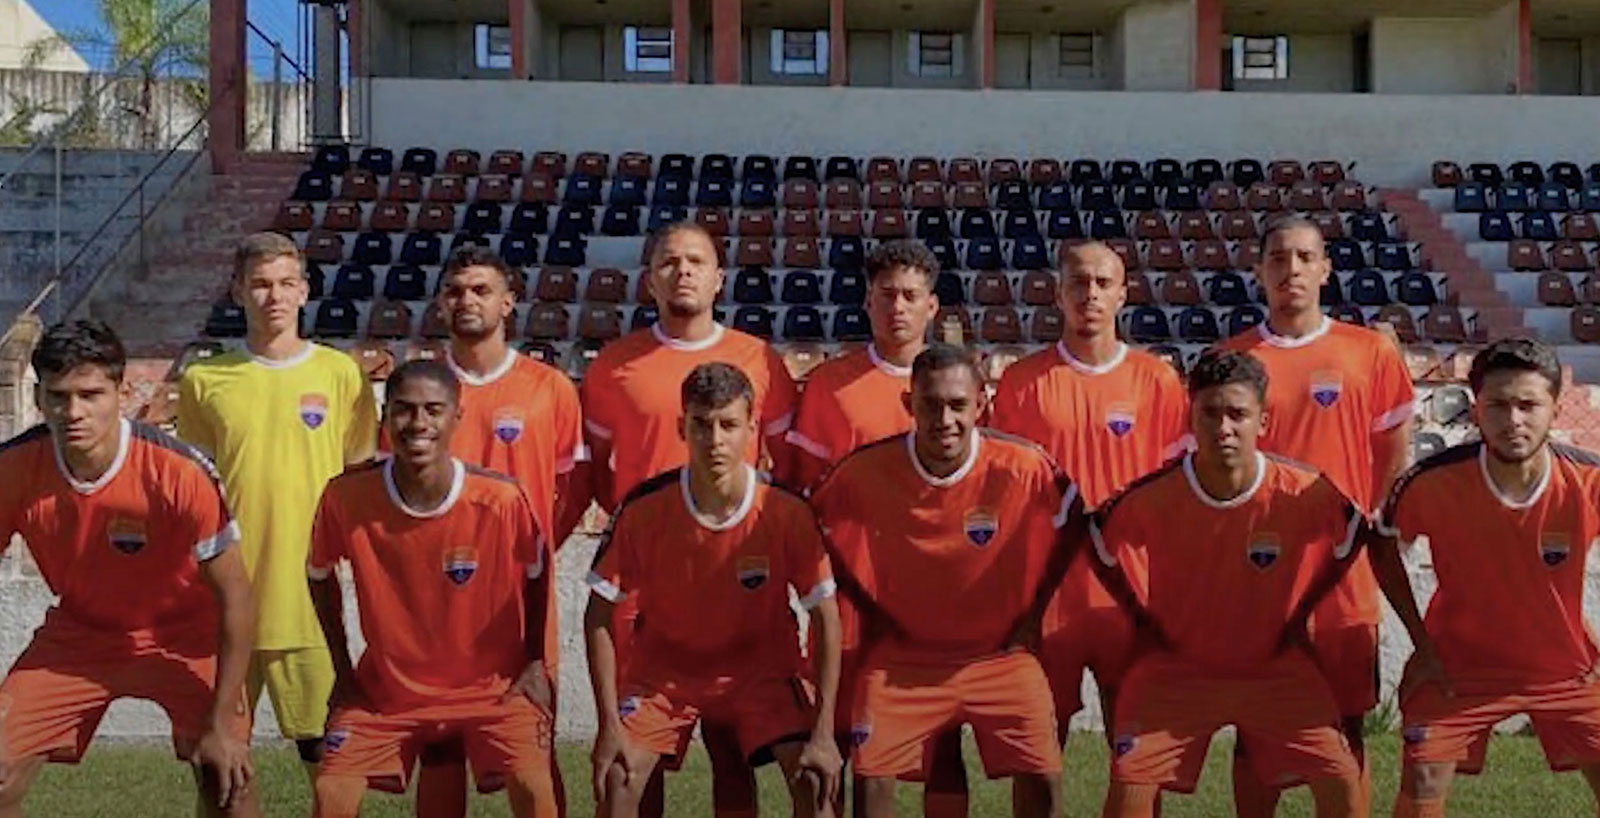 For the next six games, and maybe beyond, Associação Atlética Batel is changing its name to FC Mariupol, adopting the orange shirts of the Ukrainian side as well as its crest and logo.